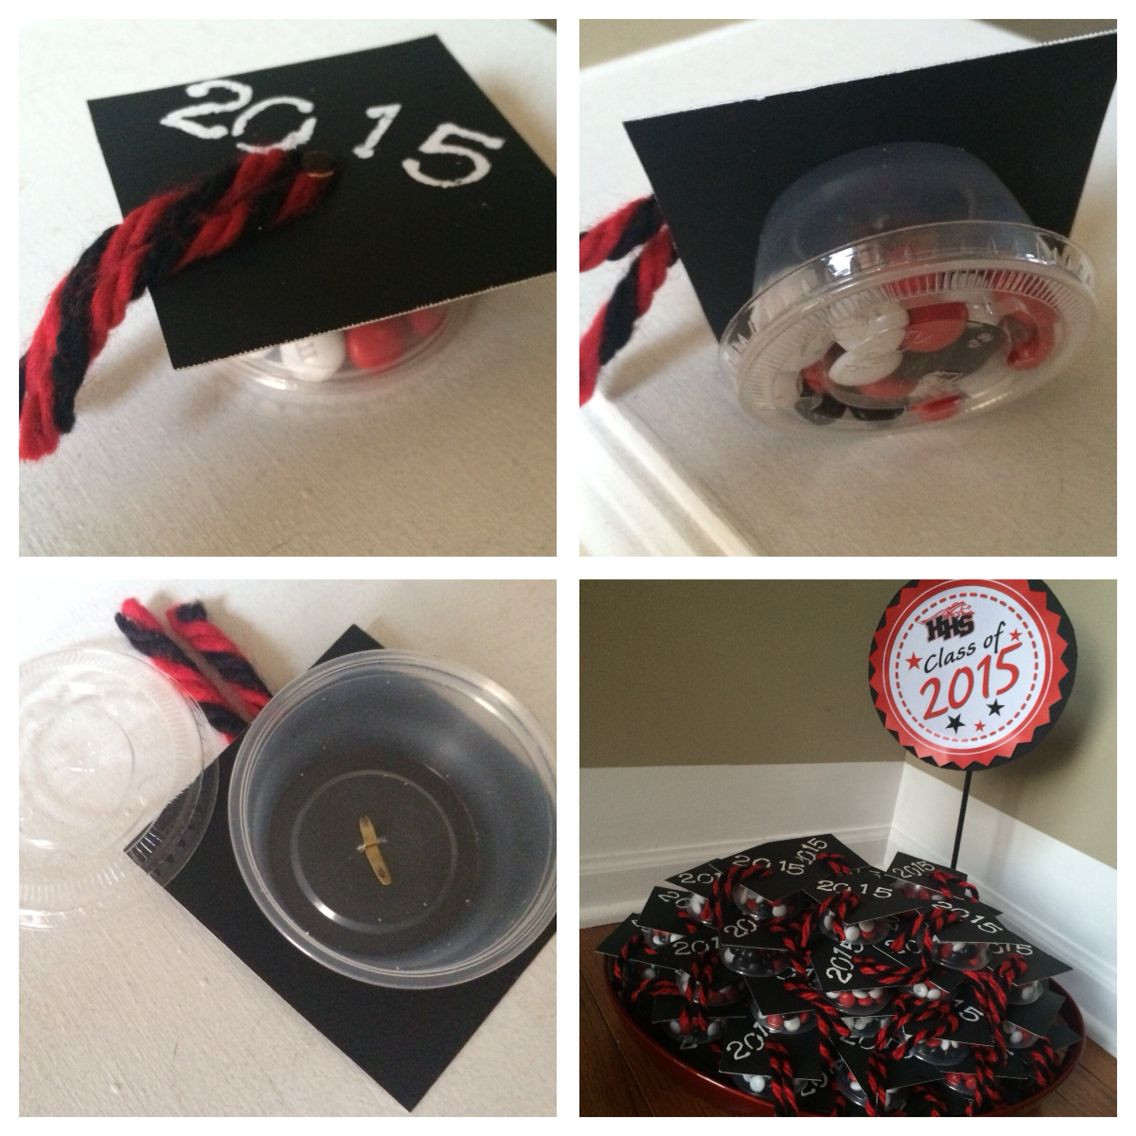 Ideas For Graduation Party Favors
 Graduation Party Favors I made these using 3"x3" black